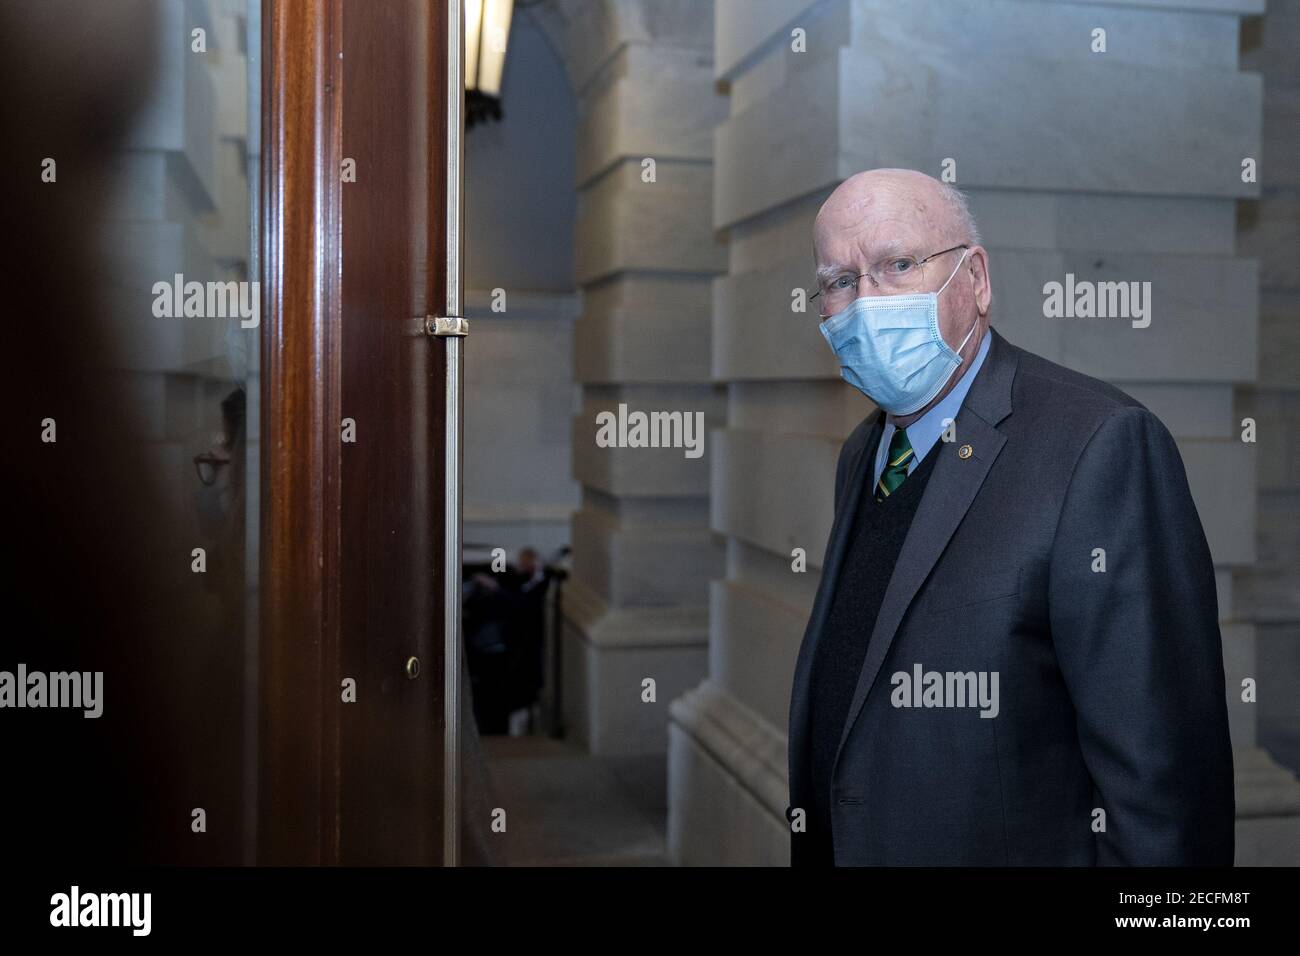 Washington, United States. 13th Feb, 2021. Senator Patrick Leahy, D-VT, departs the U.S. Capitol in Washington, DC on Saturday, February 13, 2021 after Donald Trump's second impeachment trial ended in a not guilty verdict. The Senate voted Trump guilty 57-43, short of the 2/3 majority needed for conviction. Pool photo by Stefani Reynolds/UPI Credit: UPI/Alamy Live News Stock Photo